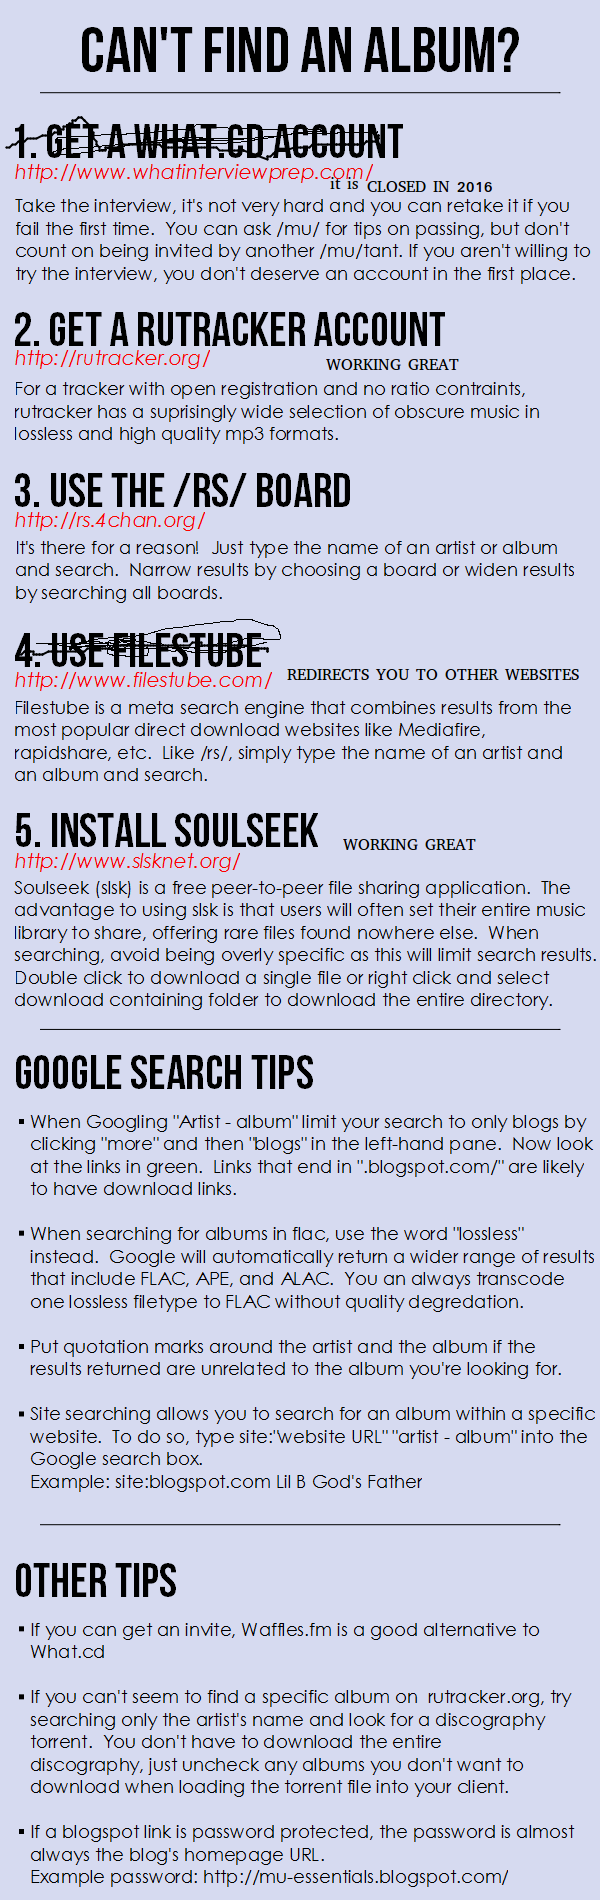 This is ridiculous. And goes against what soulseek is about